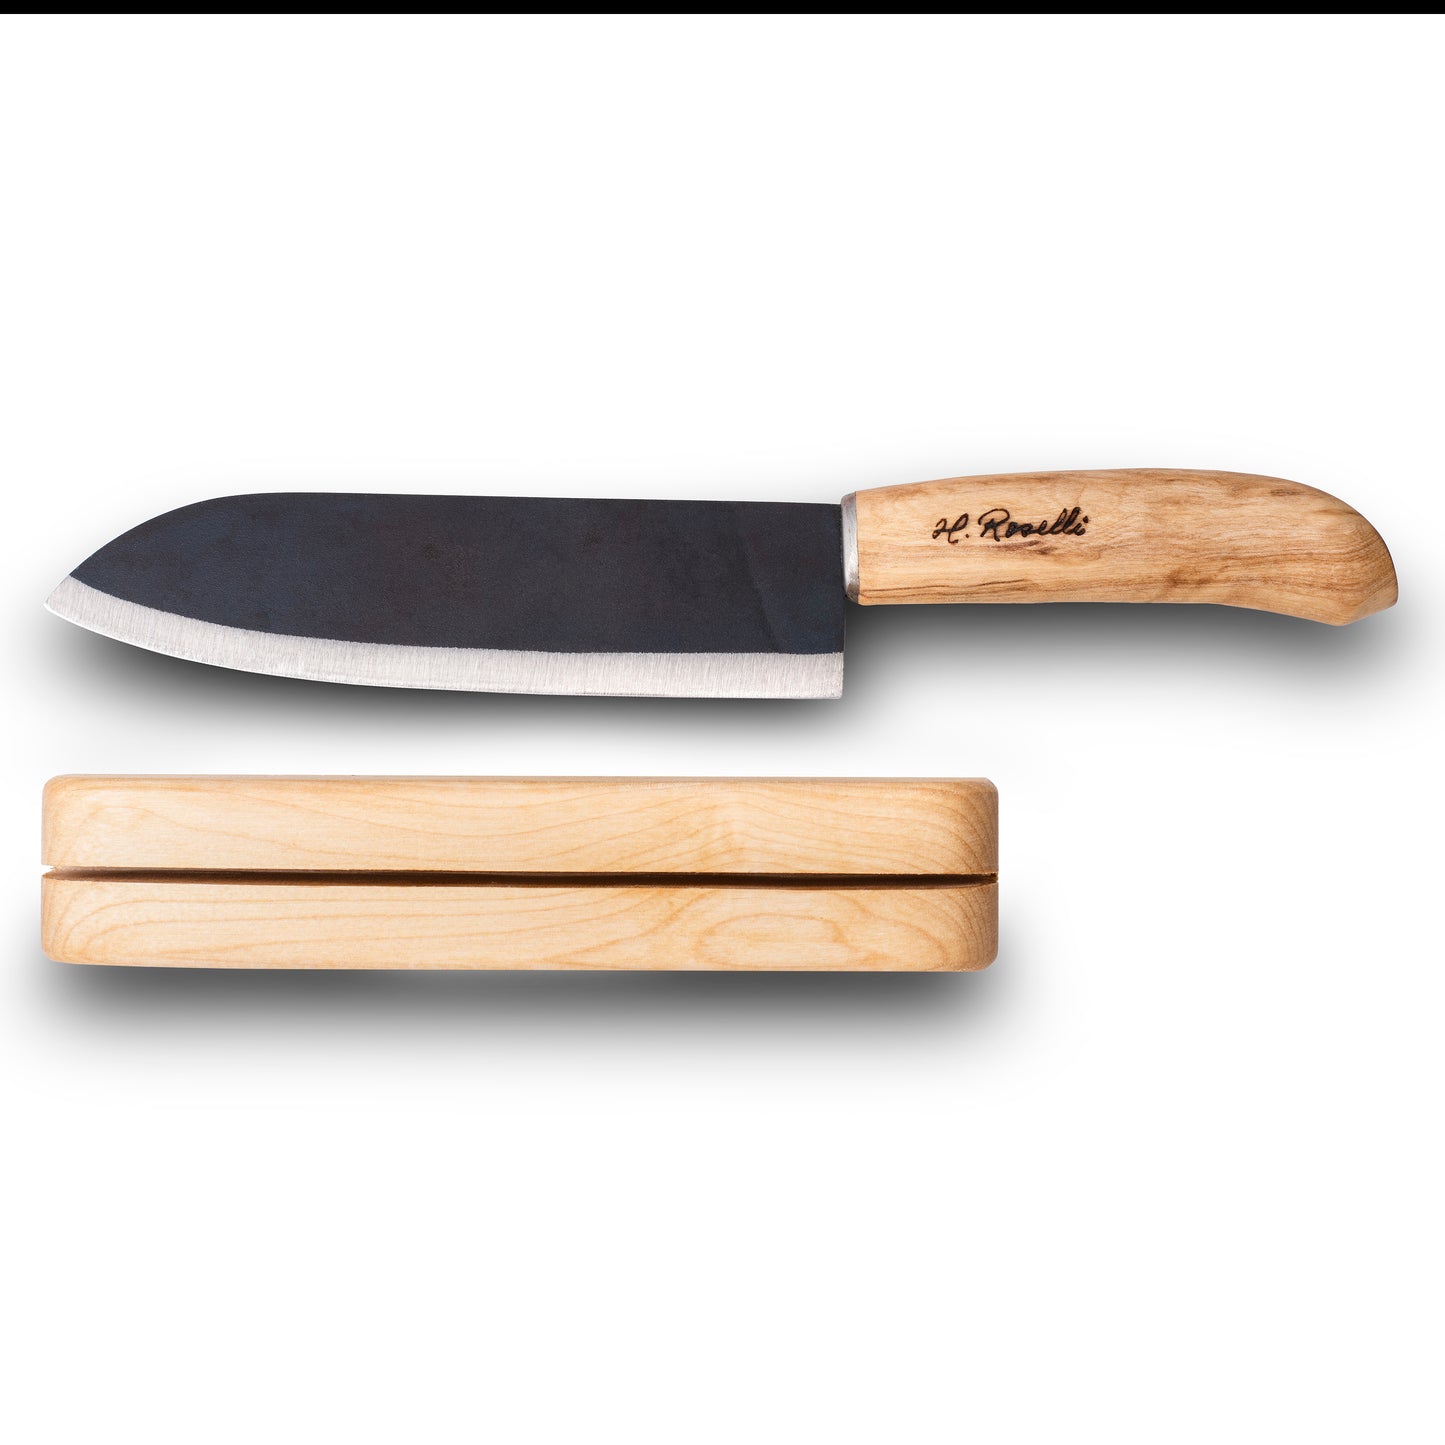 Roselli Japanese Cook's Knife Culinary Kitchen Cooking Knife